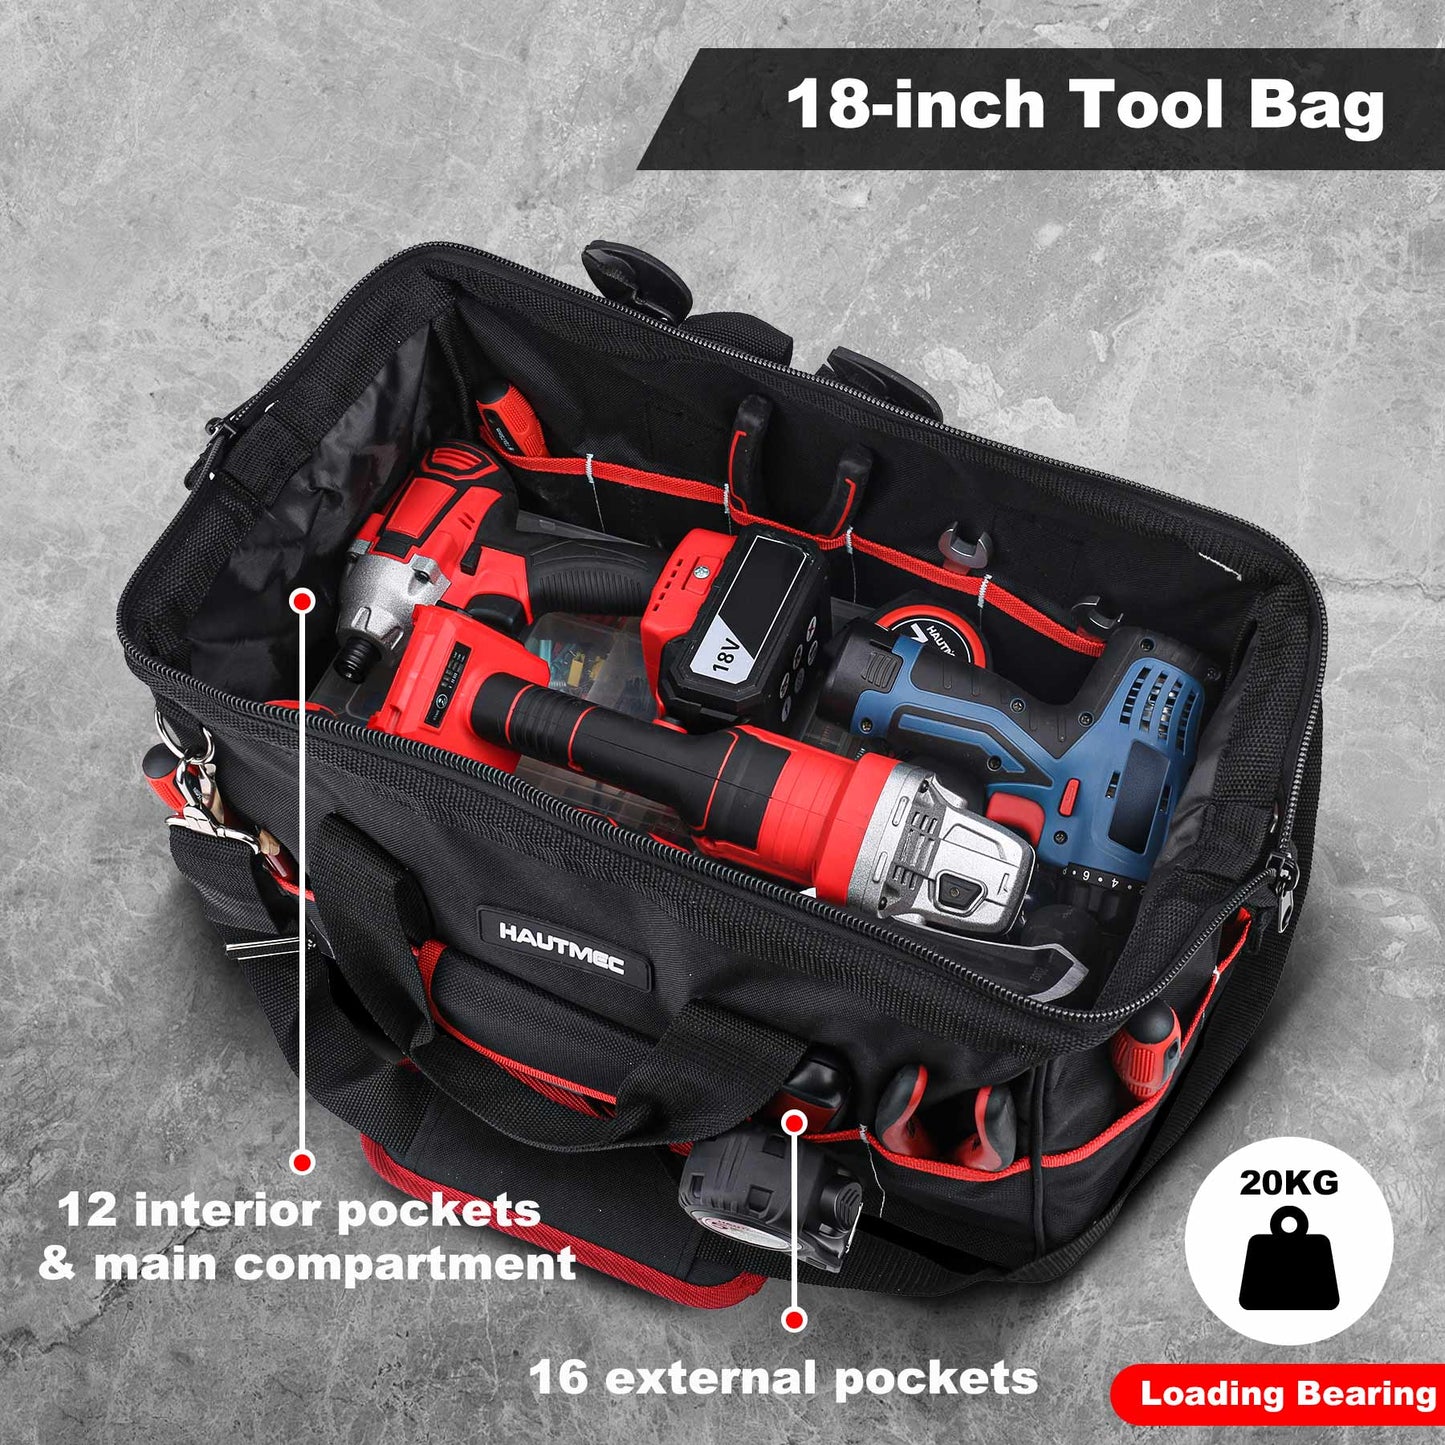 HAUTMEC 3PCS Wide Mouth Tool Bags Set, Heavy Duty Tool Bag with Large Capacity and Waterproof Base,12-inch Small Tool Bag,18-inch Medium Toolbag,24-inch Large Tool Storage Bag for Construction HT0297